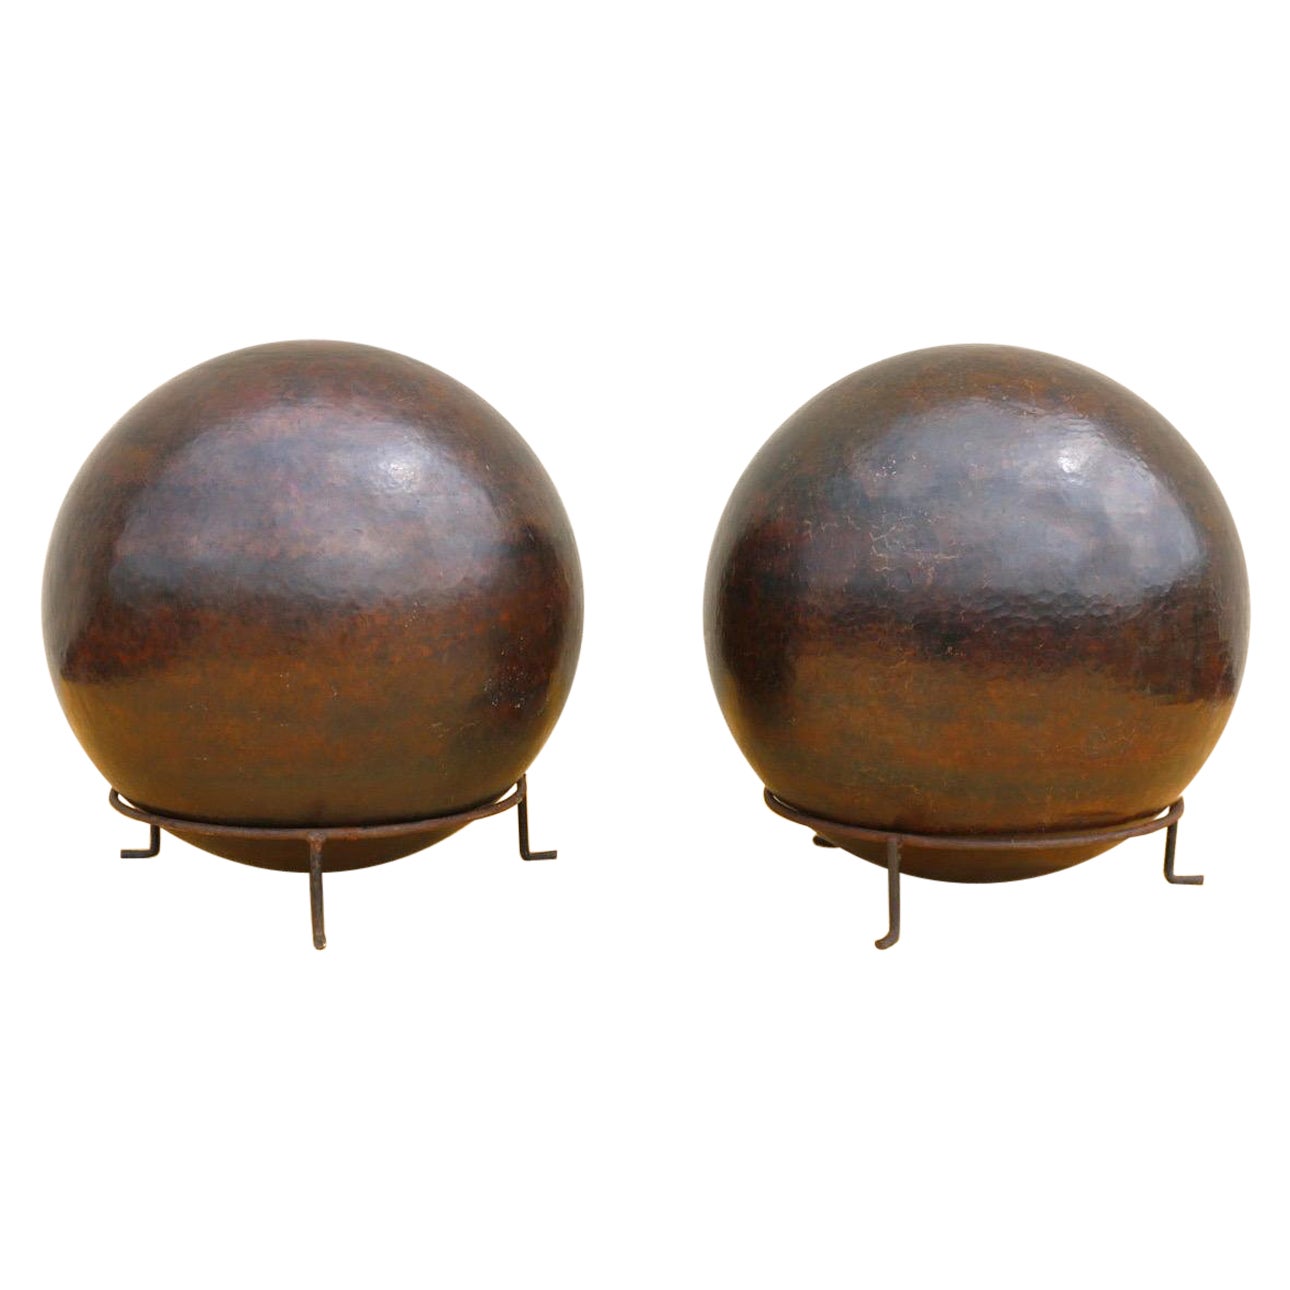 1980s Vintage Pair of Copper Spheres Sculptures by Robert Kuo